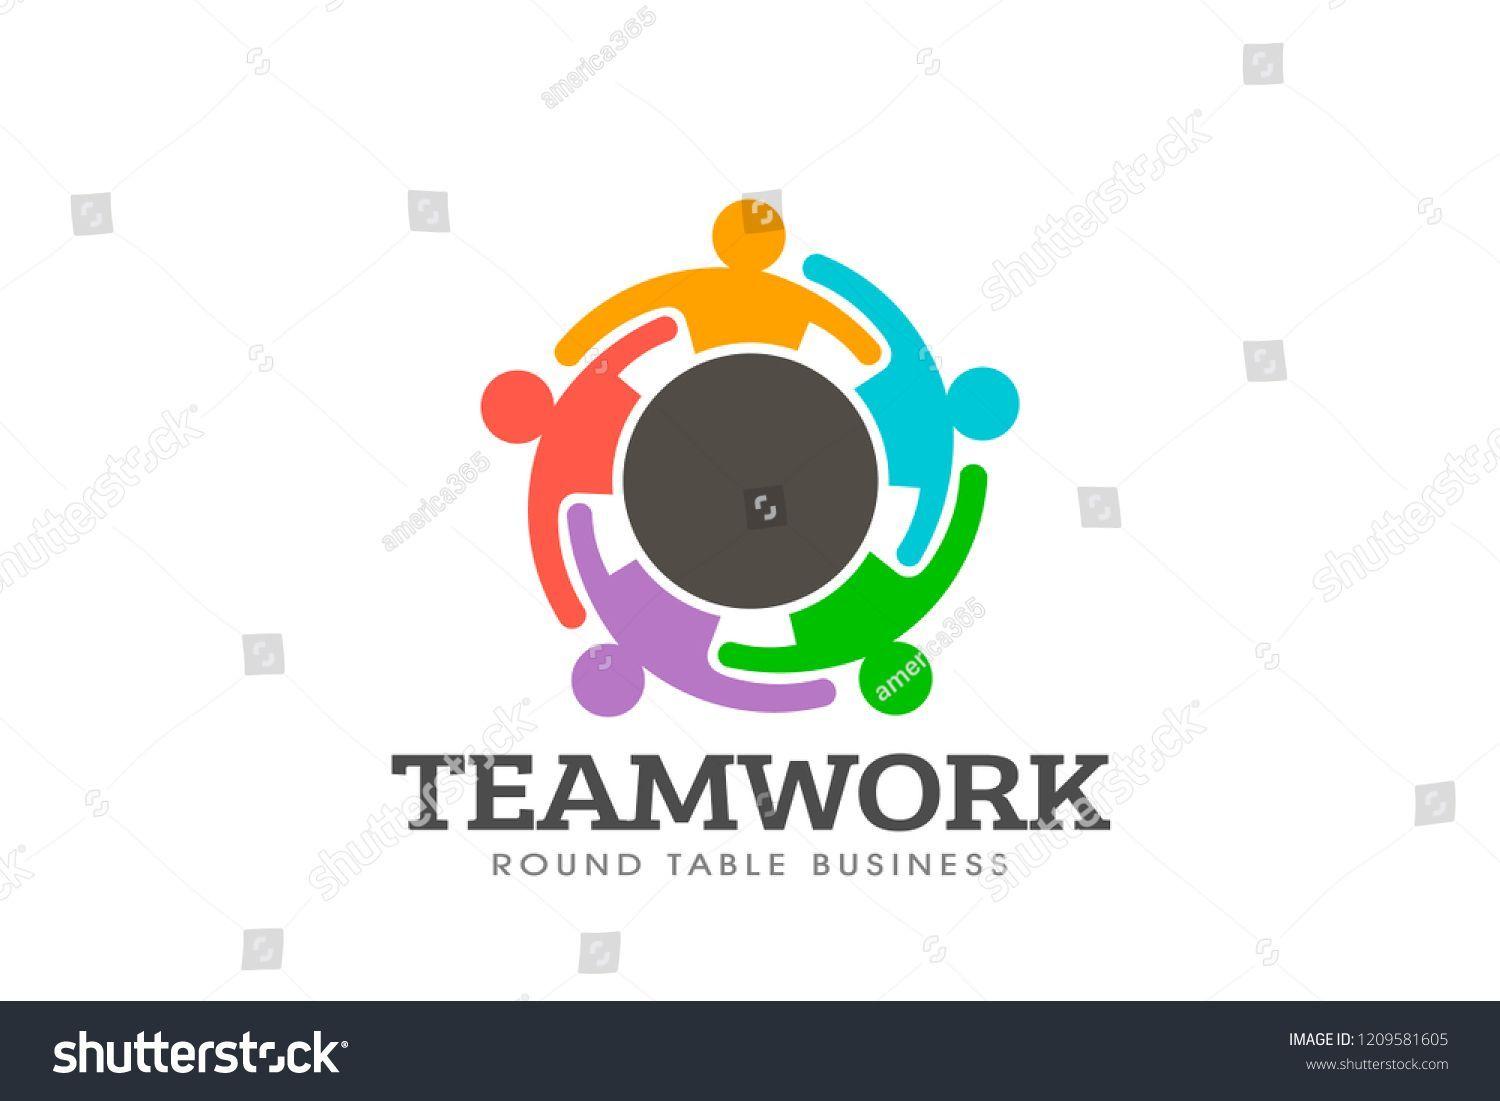 Person Group Logo - Teamwork round table logo vector #people #social #internet #network ...